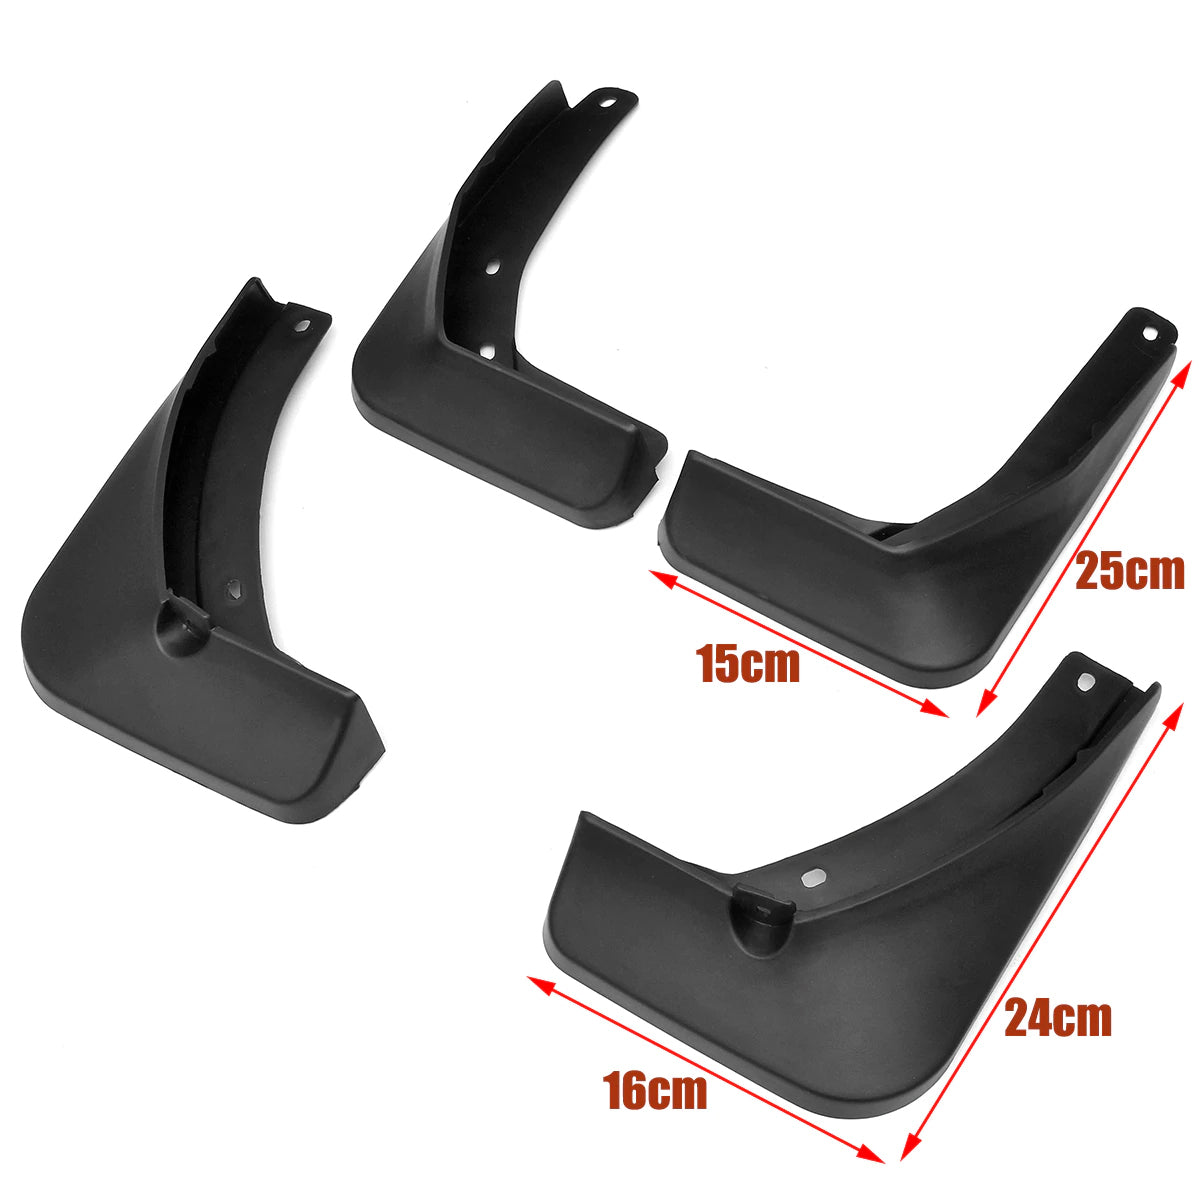 Oshotto Mud Flap (O.E.M Type) For XUV 700 (2021-2023) (Set of 4pc)